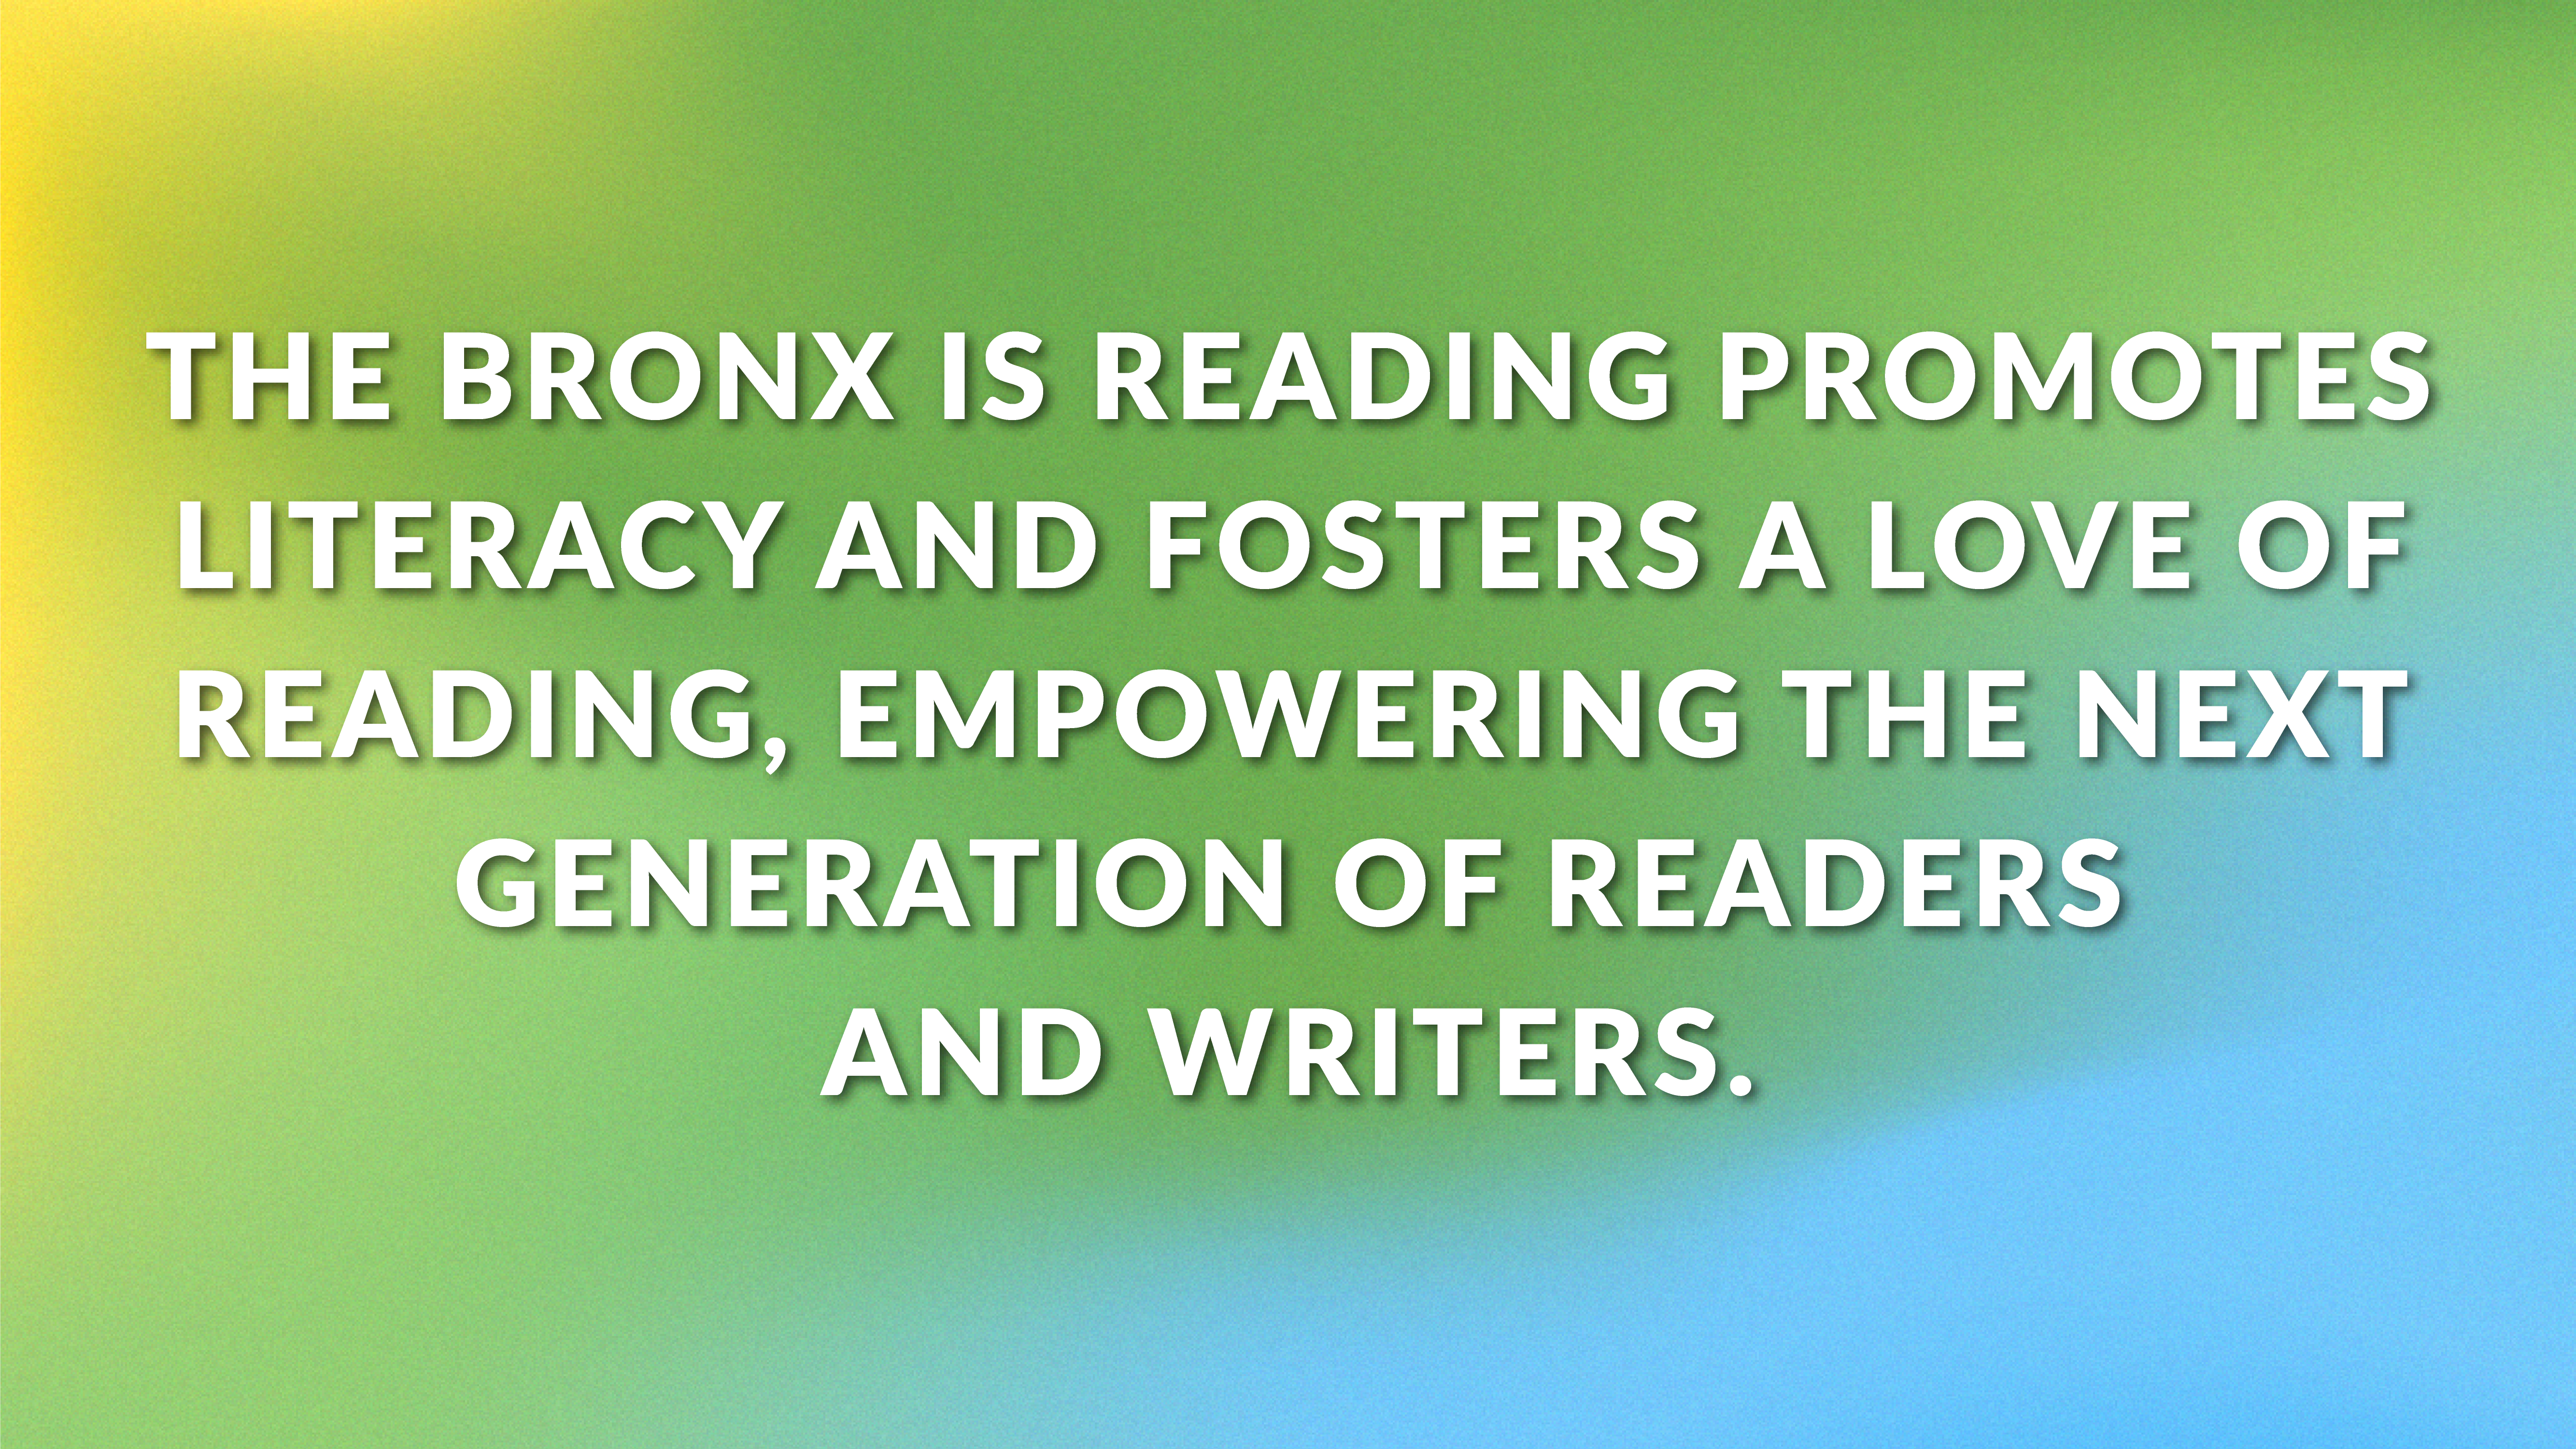 The Bronx is Reading promotes literacy and fosters a love of reading, empowering the next generation of readers and writers.